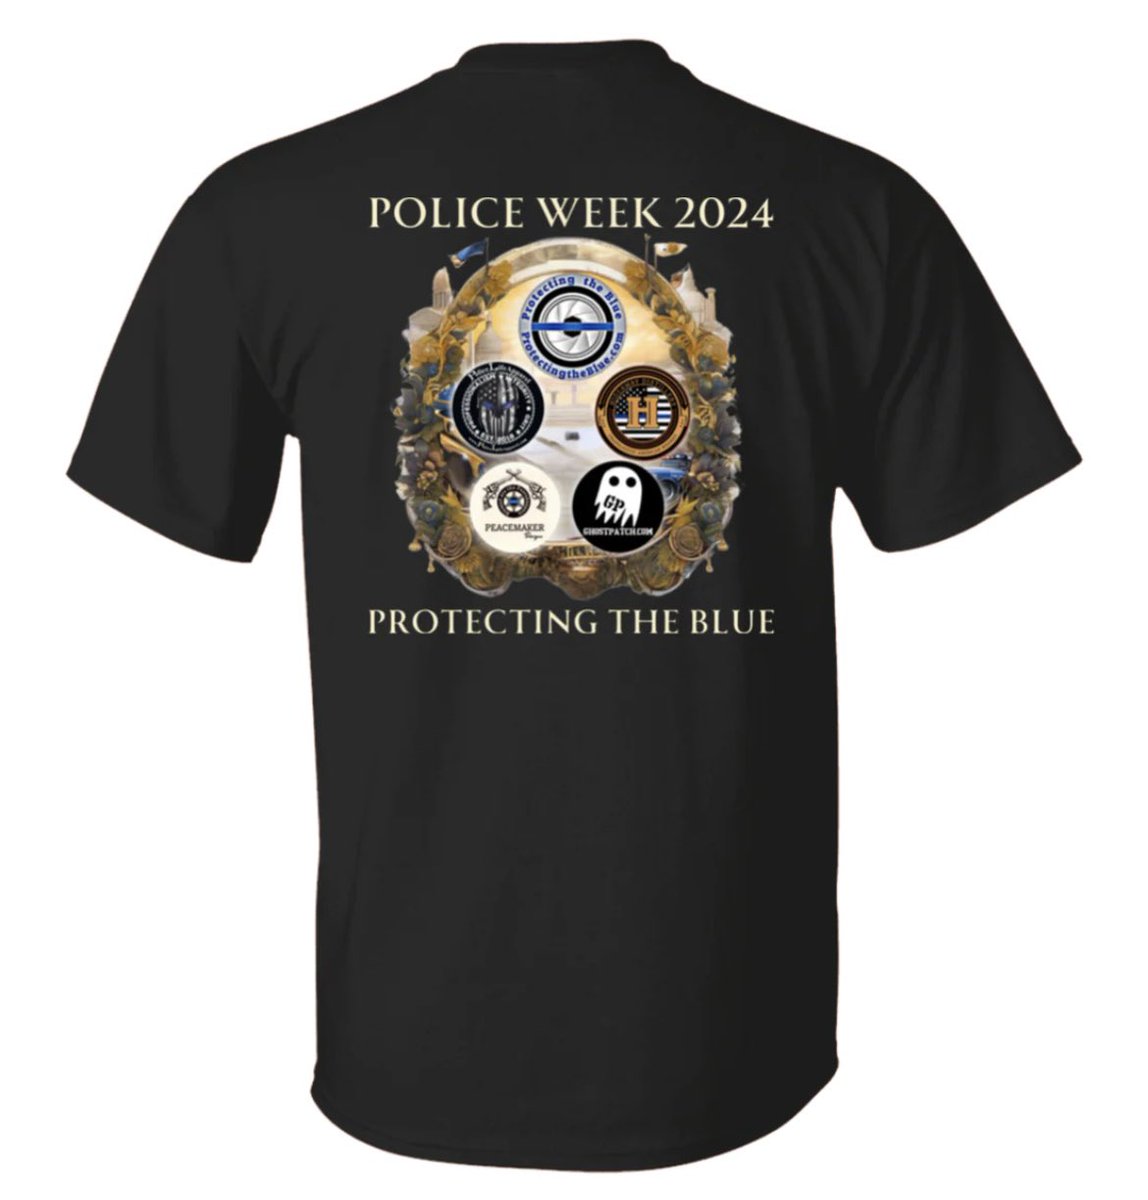 Our #PoliceWeek2024 T-shirts have arrived, and they are off the charts awesome! Getting one of these fantastic shirts not only enhances your wardrobe but also helps our goal of honoring our courageous heroes with special challenge coins during Police Week! defendtheline.com/products/prote…